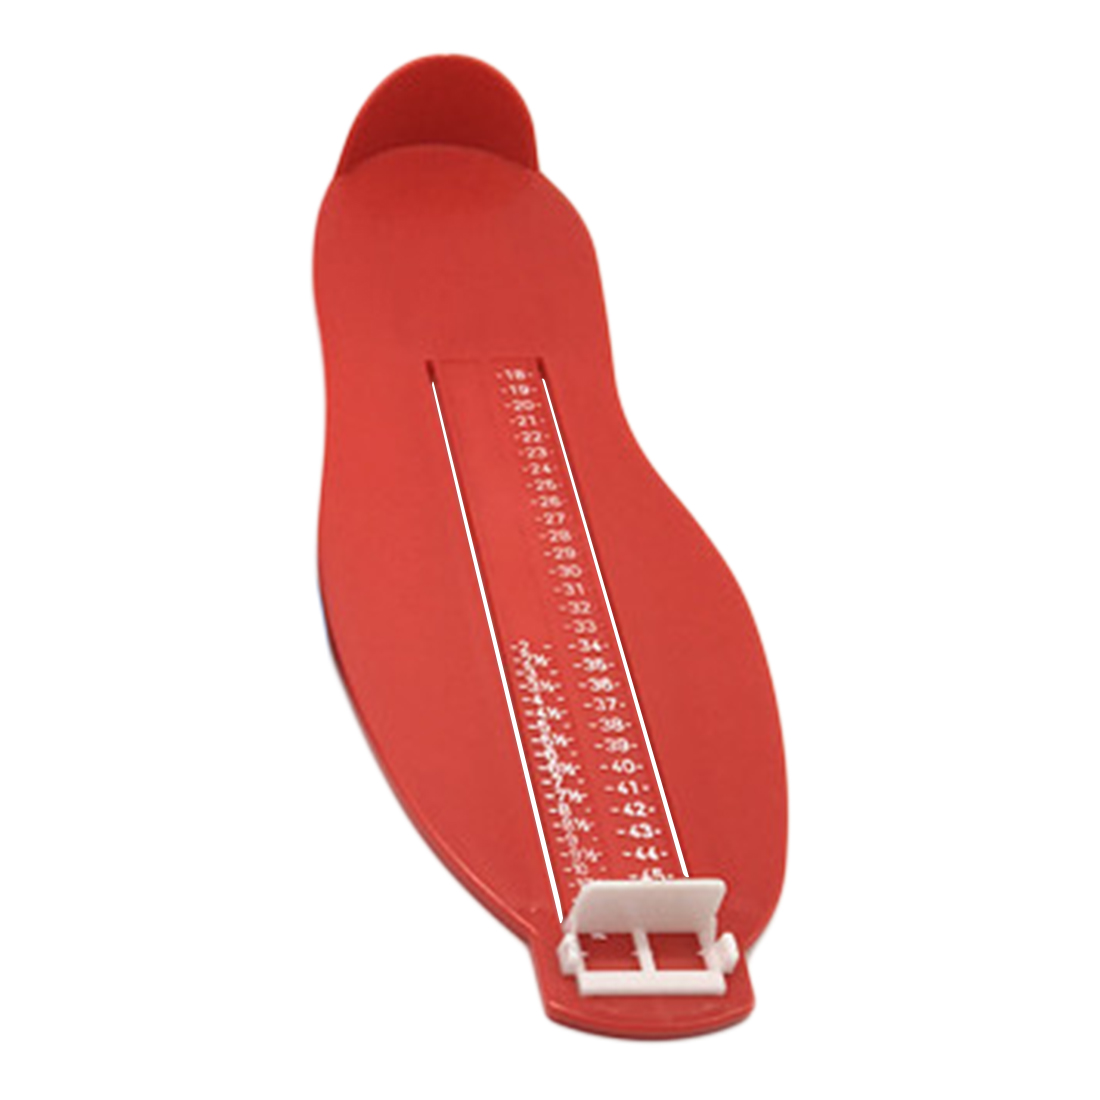 Hot Adults Foot Measuring Device Shoes Size Gauge Measure Ruler Tool Device Helper